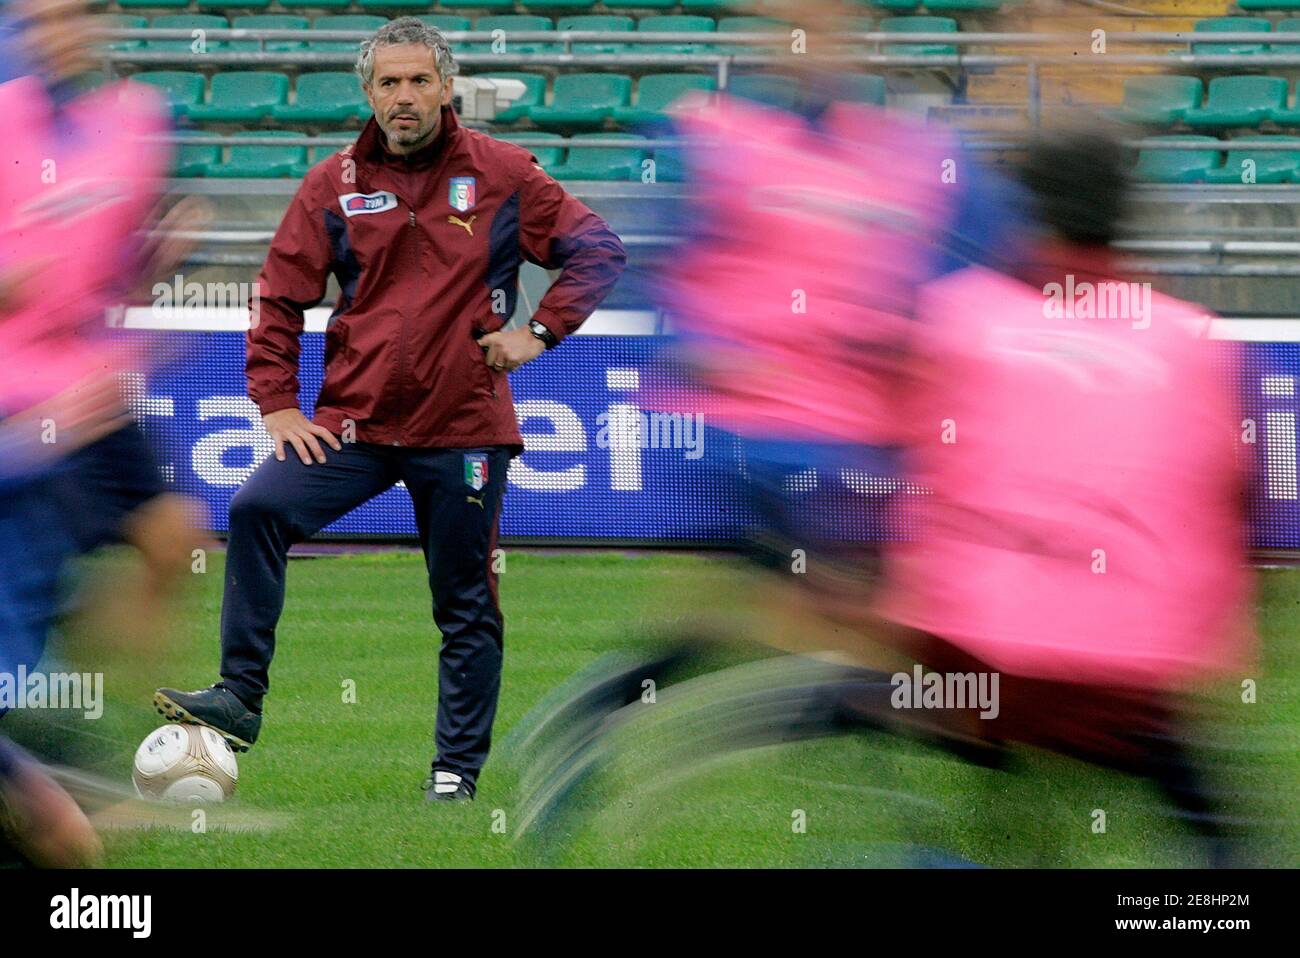 Italy's coach Roberto Donadoni looks on during a training session for the upcoming Euro 2008 qualifying soccer match against Scotland at the San Nicola stadium in Bari March 27, 2007.  REUTERS/Alessandro Bianchi   (ITALY) Stock Photo